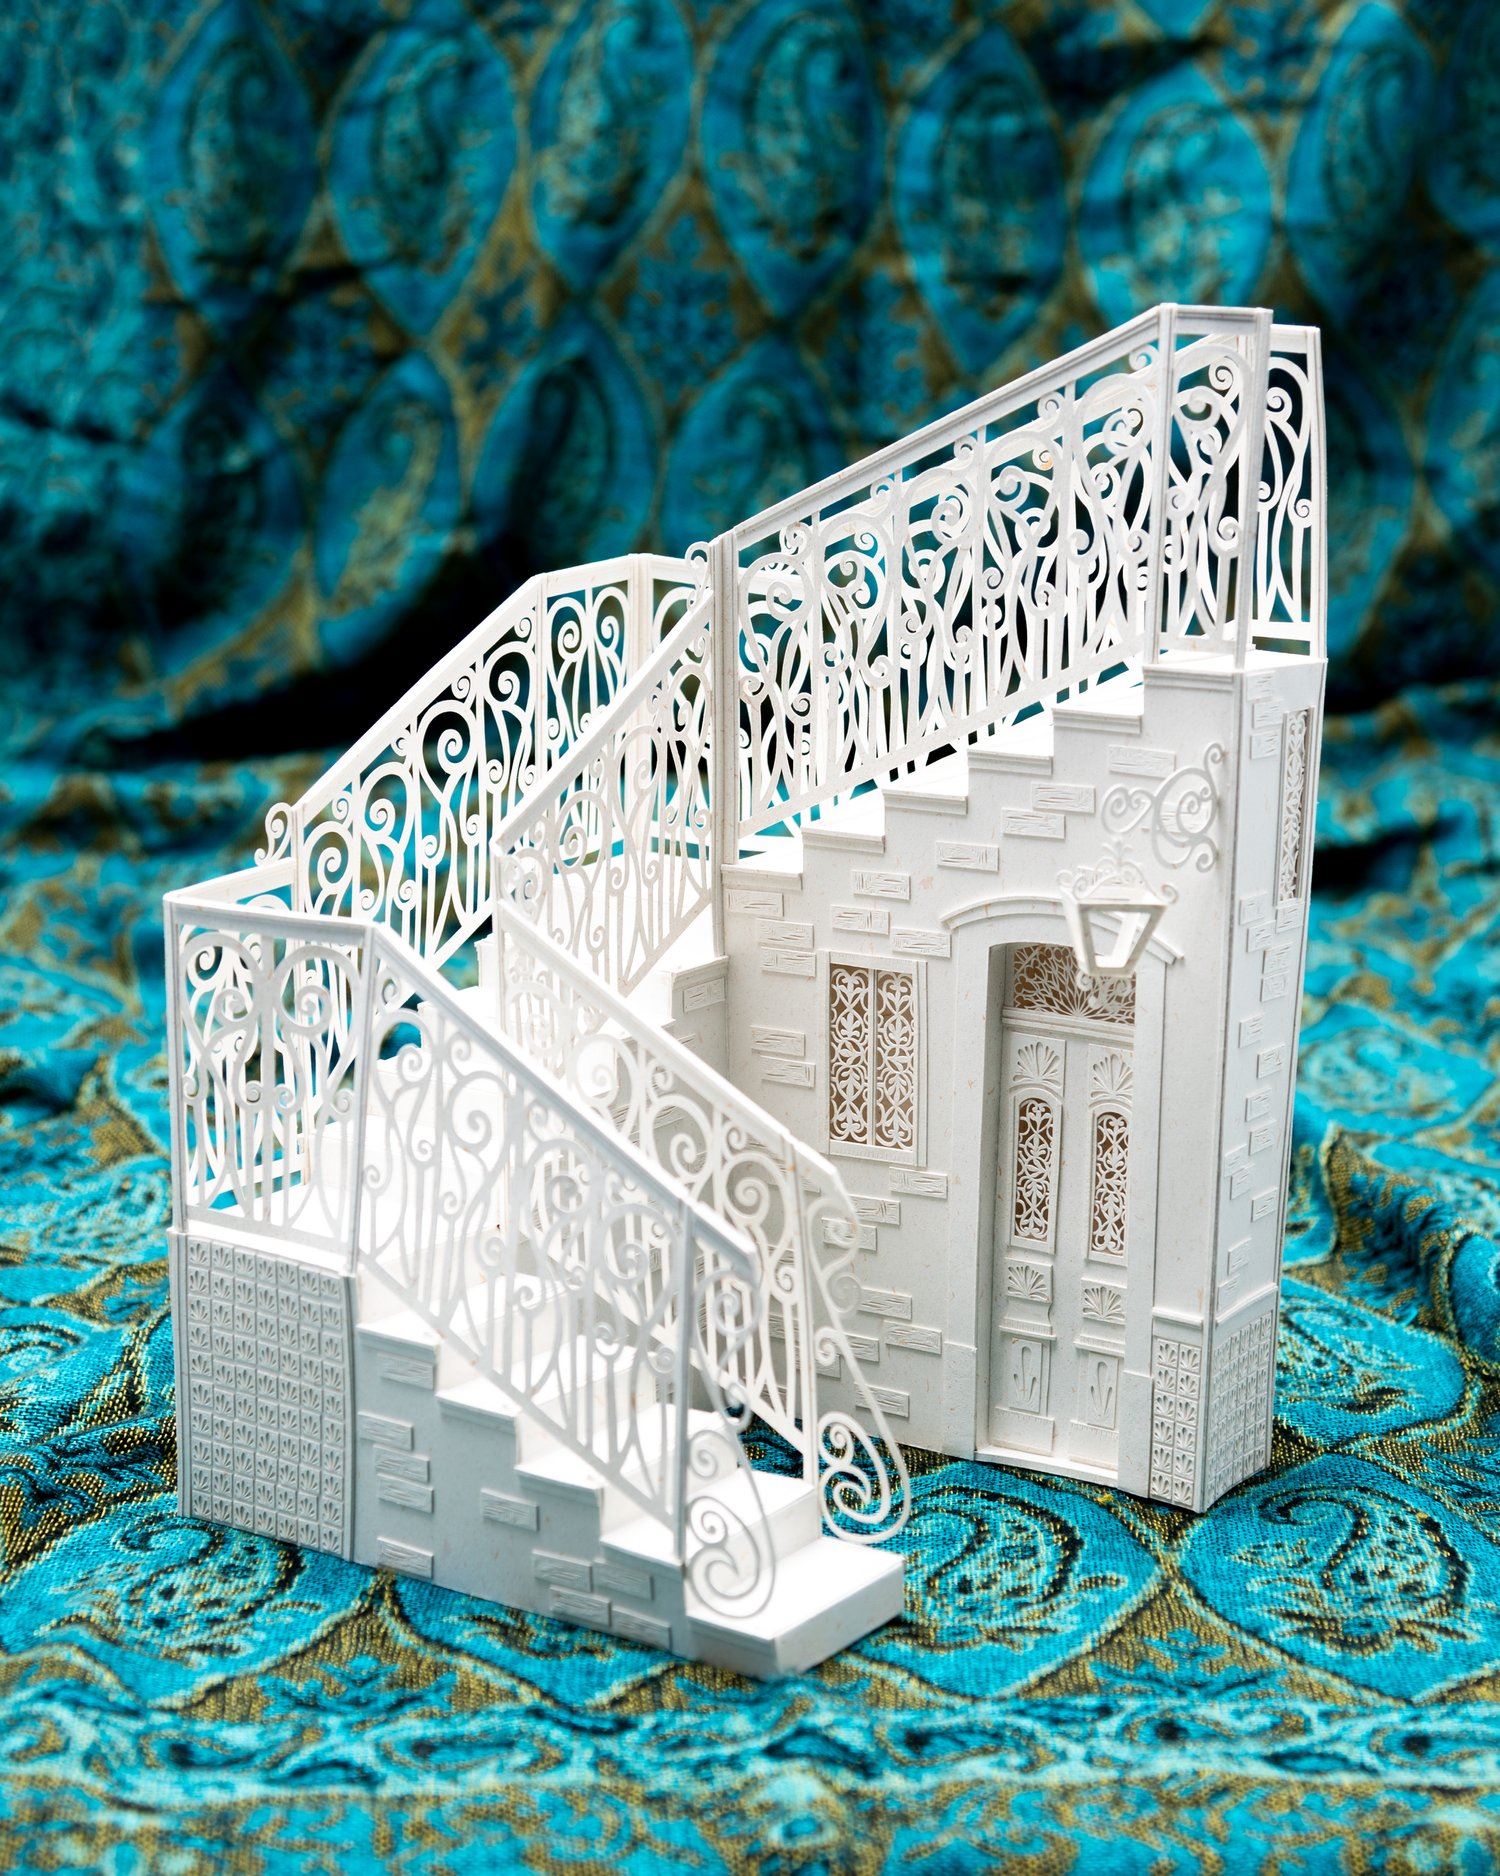 An architectural sculpture of a staircase made of paper, photographed on a teal paisley background.